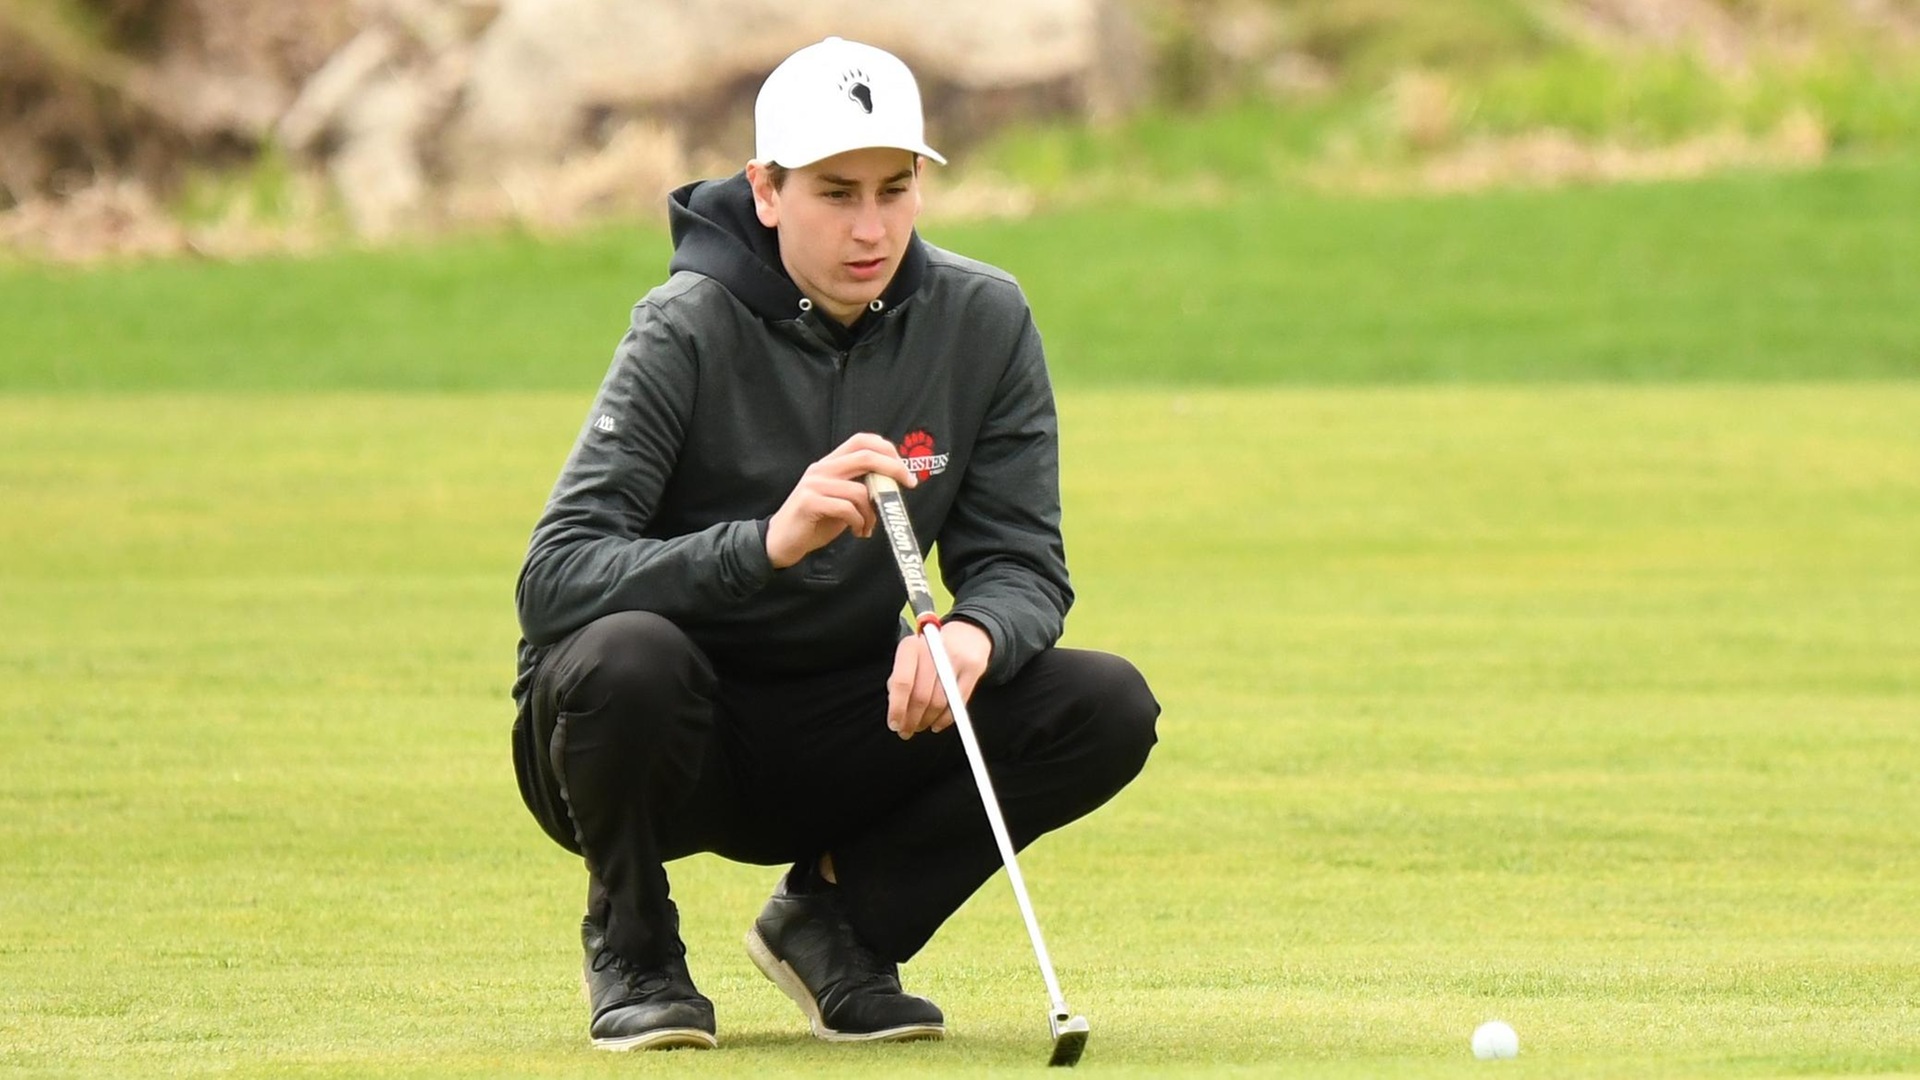 Foresters Take on Tough Competition at Illinois Wesleyan Invitational